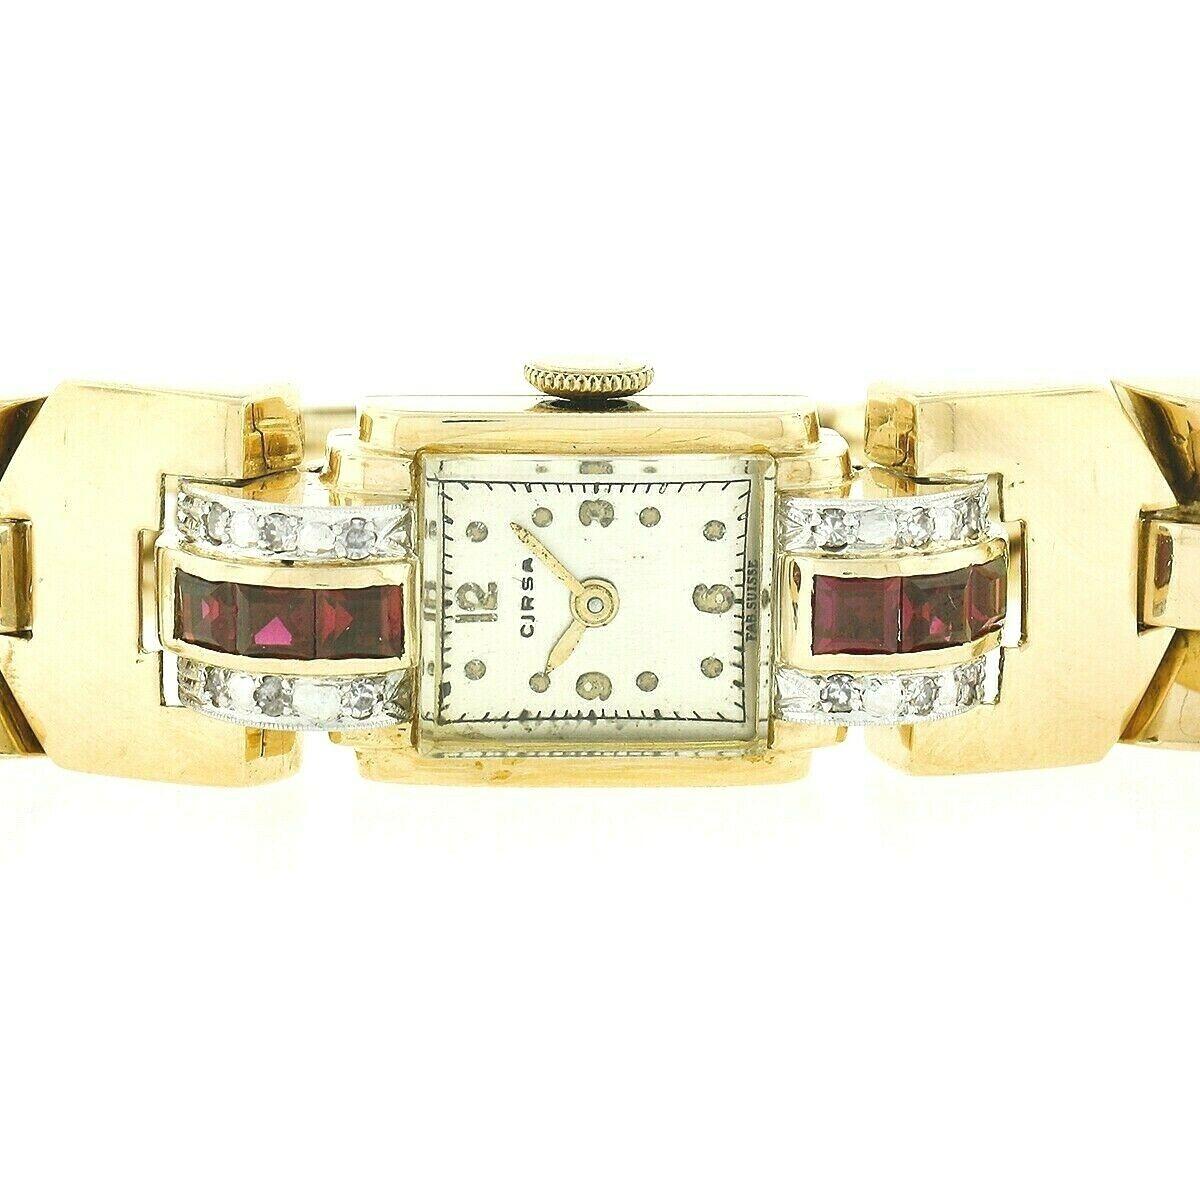 This gorgeous vintage wrist watch was crafted in Switzerland from solid 14k yellow gold during the retro period. It features vivid blood red synthetic rubies and natural round single cut diamonds accenting the dial at the top and bottom. The